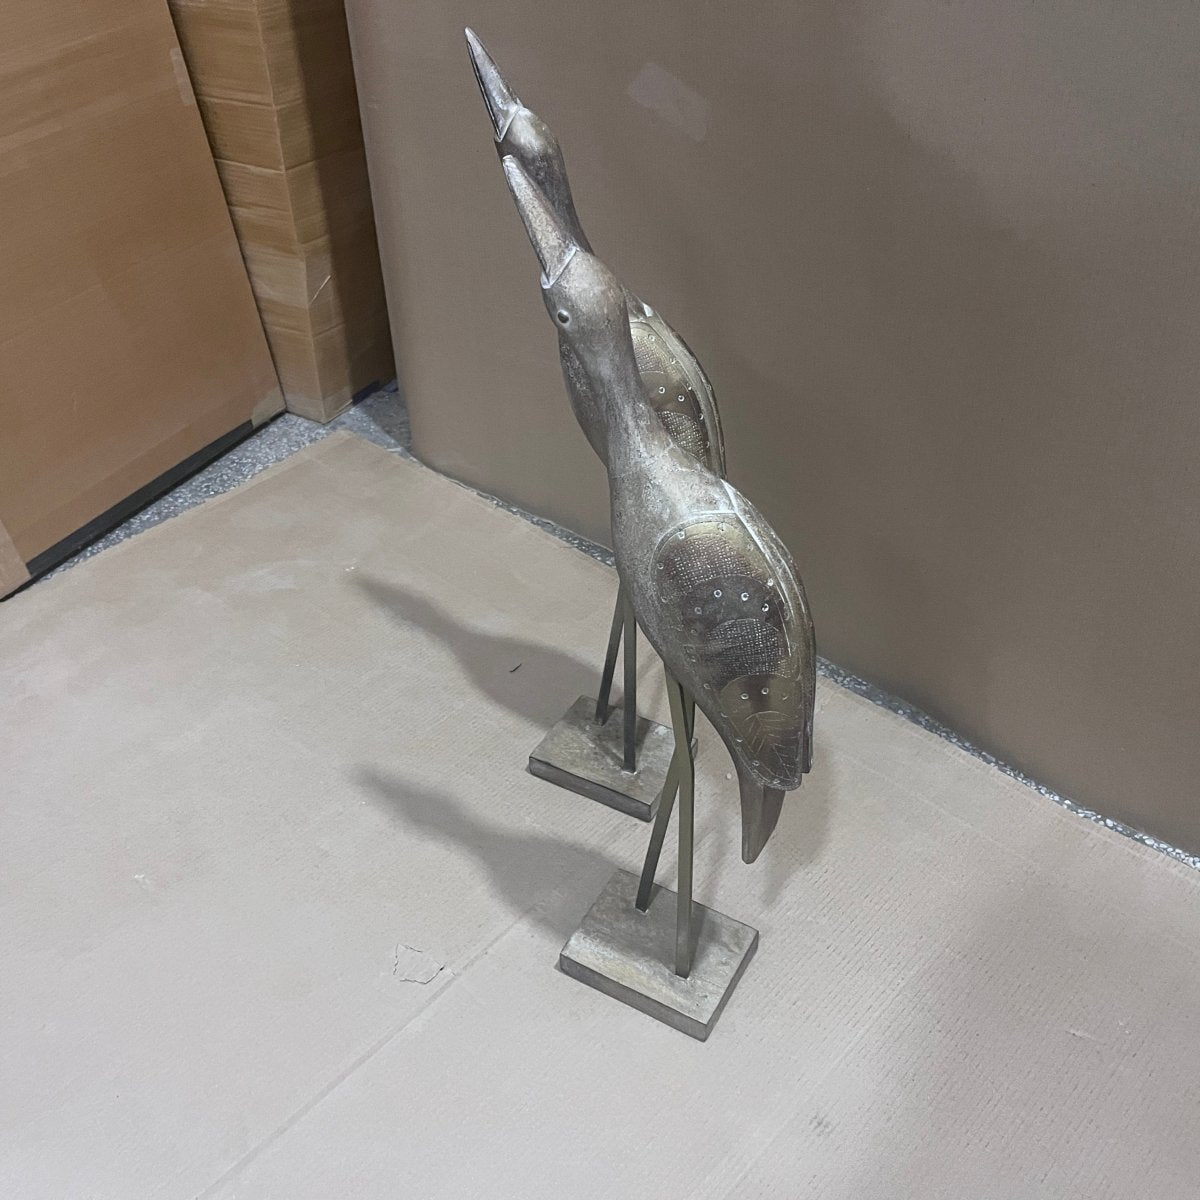 Decorative standing wooden bird - Rustic Furniture Outlet